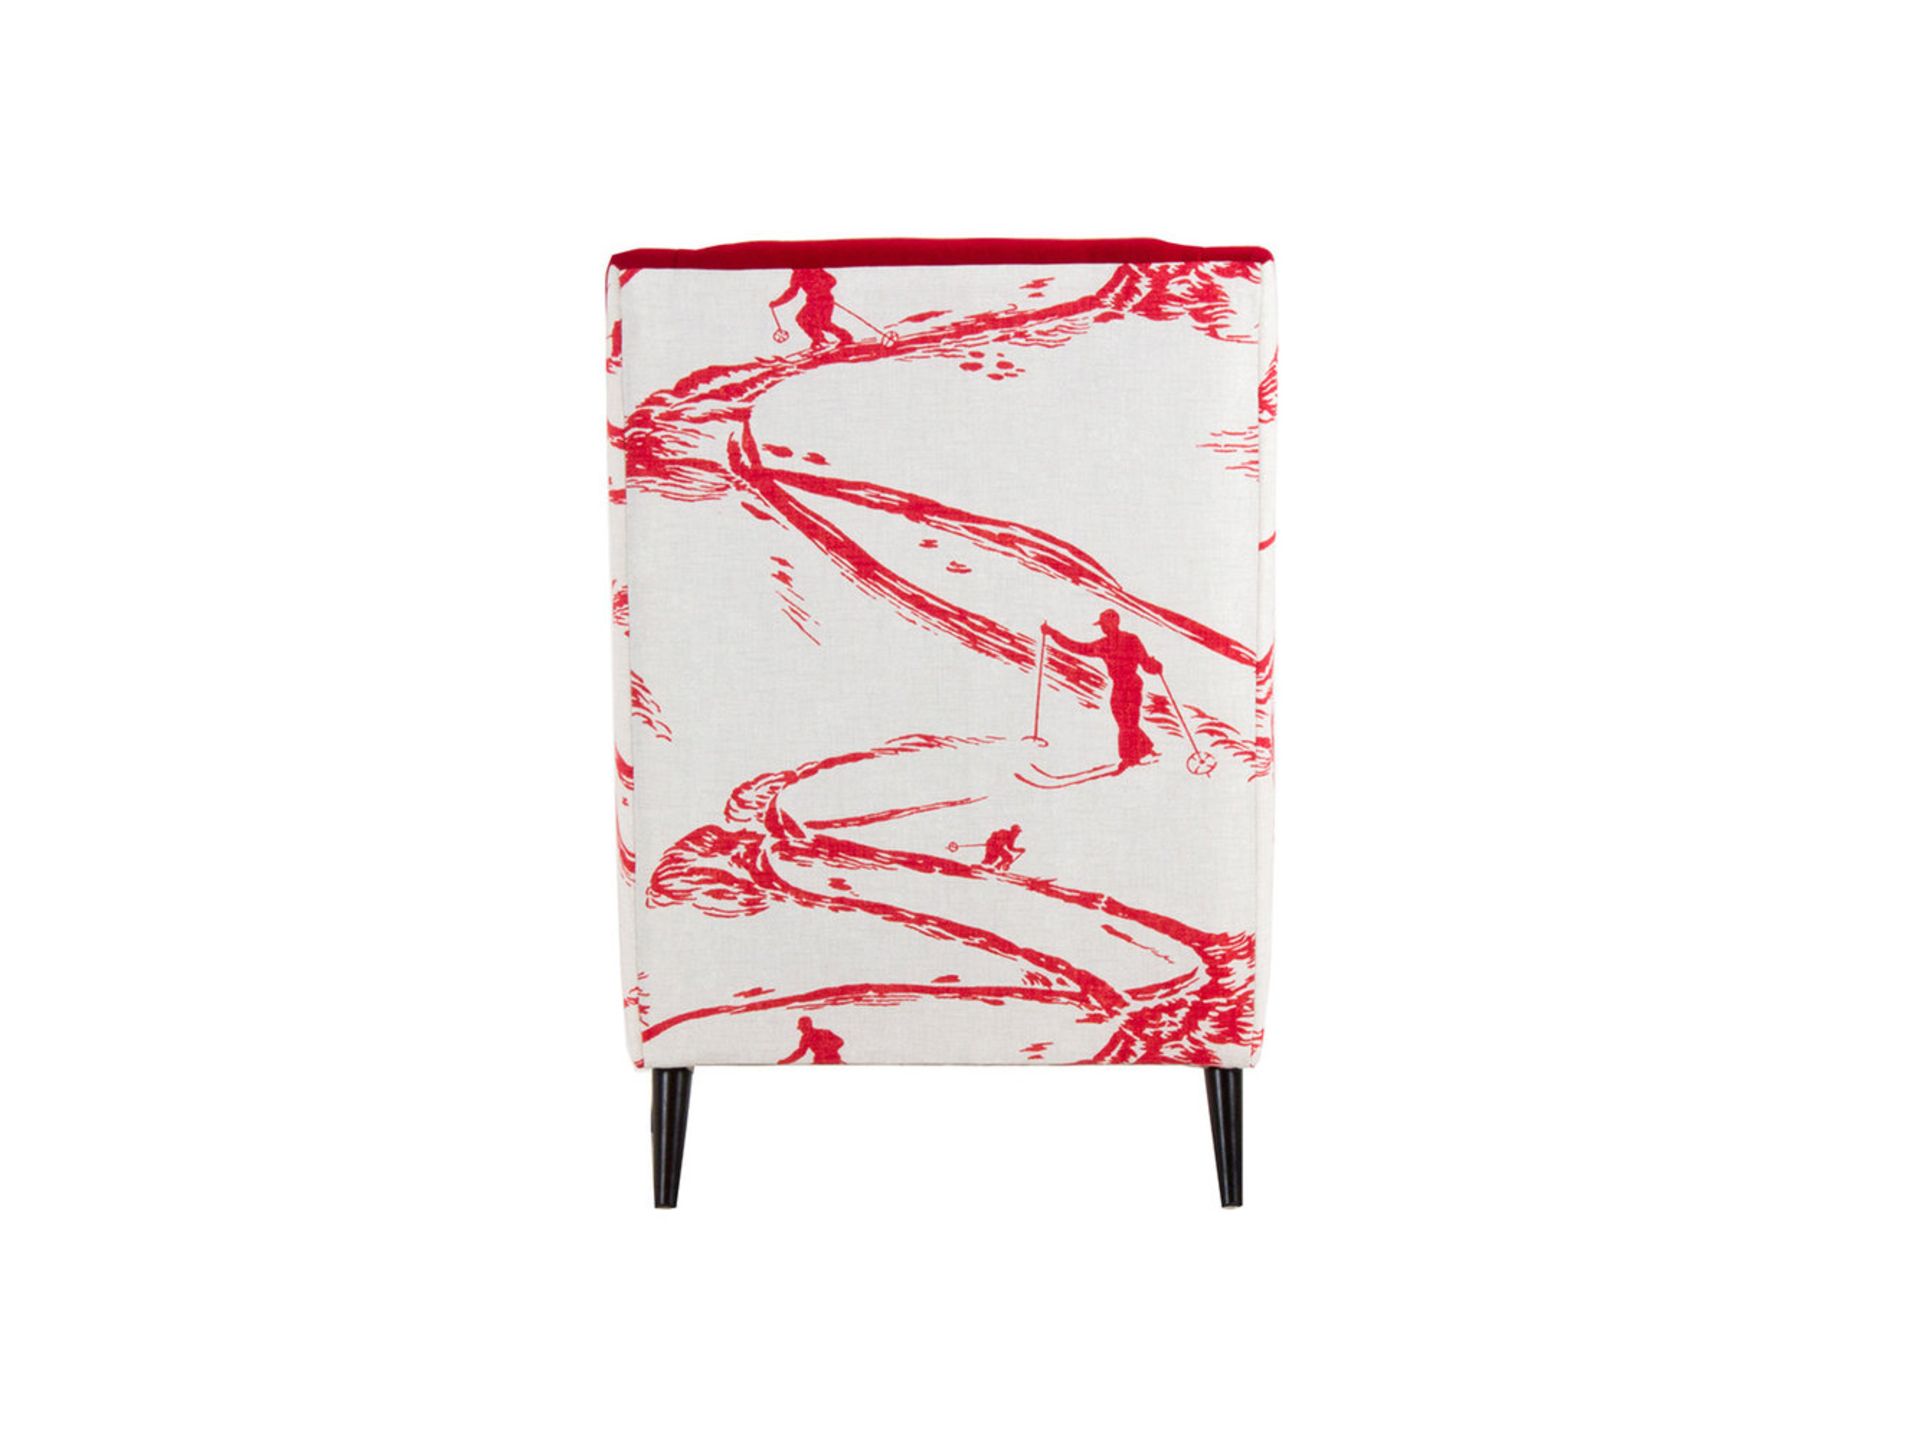 1 x Lauran Armchair Upholstered in Aviemore Skiing Fabric in Red and White - RRP £779! - Image 7 of 7